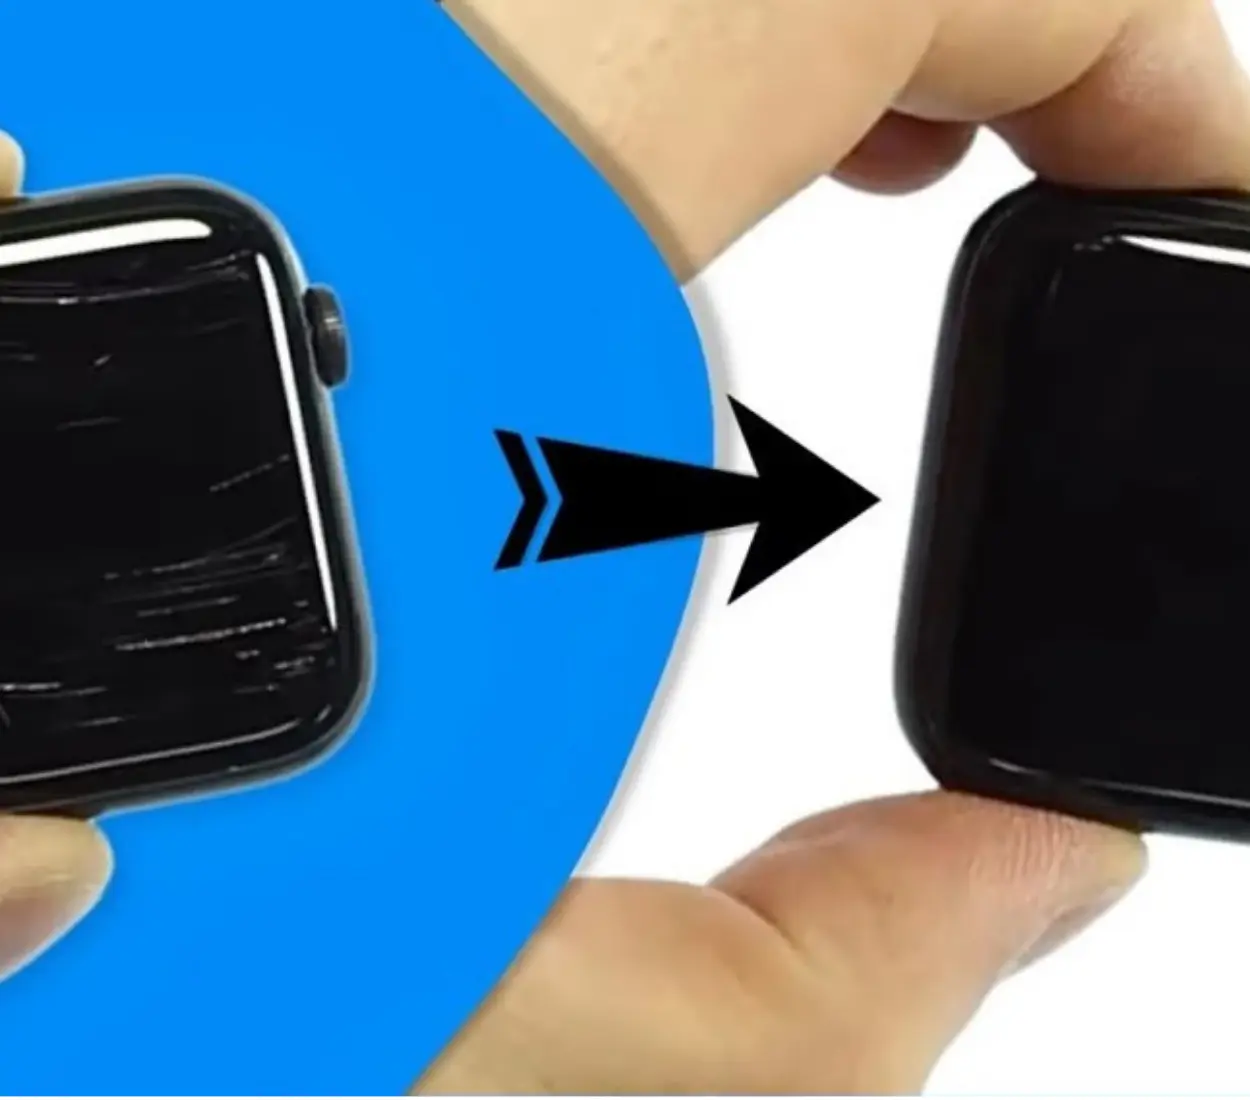 fix-iWatch-repaired-display-from-damaged-display